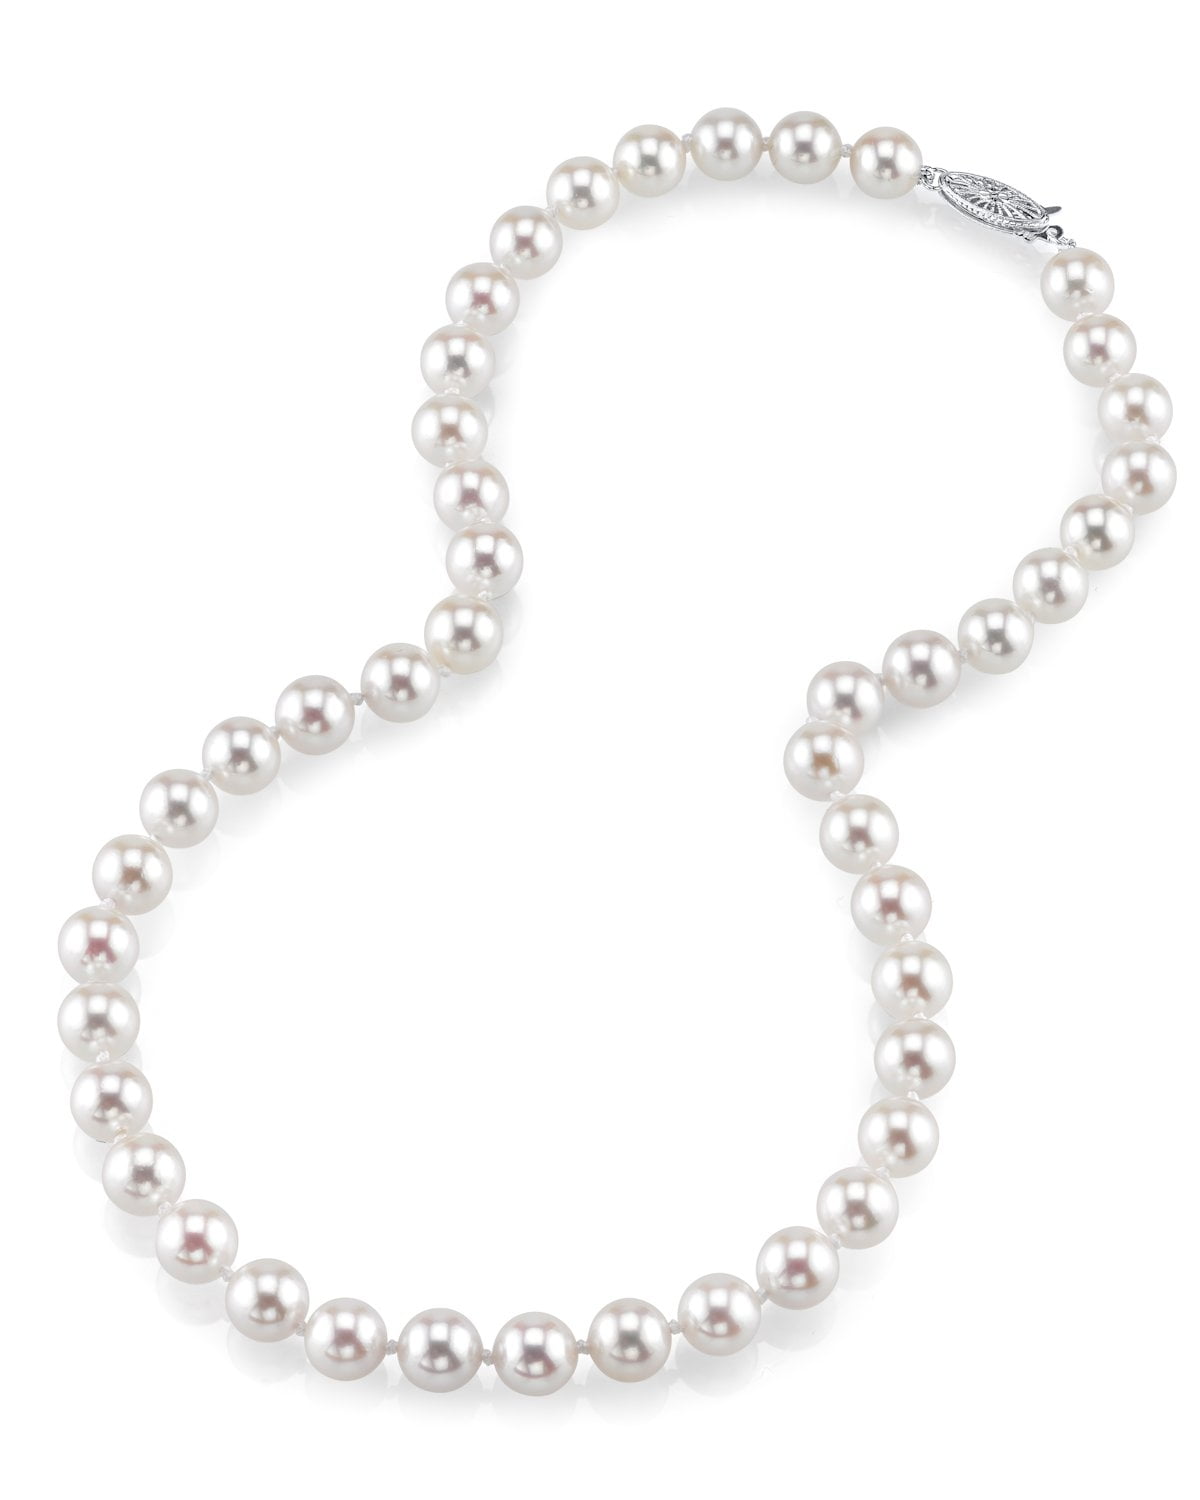 White Akoya Saltwater Cultured Pearl Necklace for Women in 18 Inch Length with 14K Gold and AAA Quality THE PEARL SOURCE 